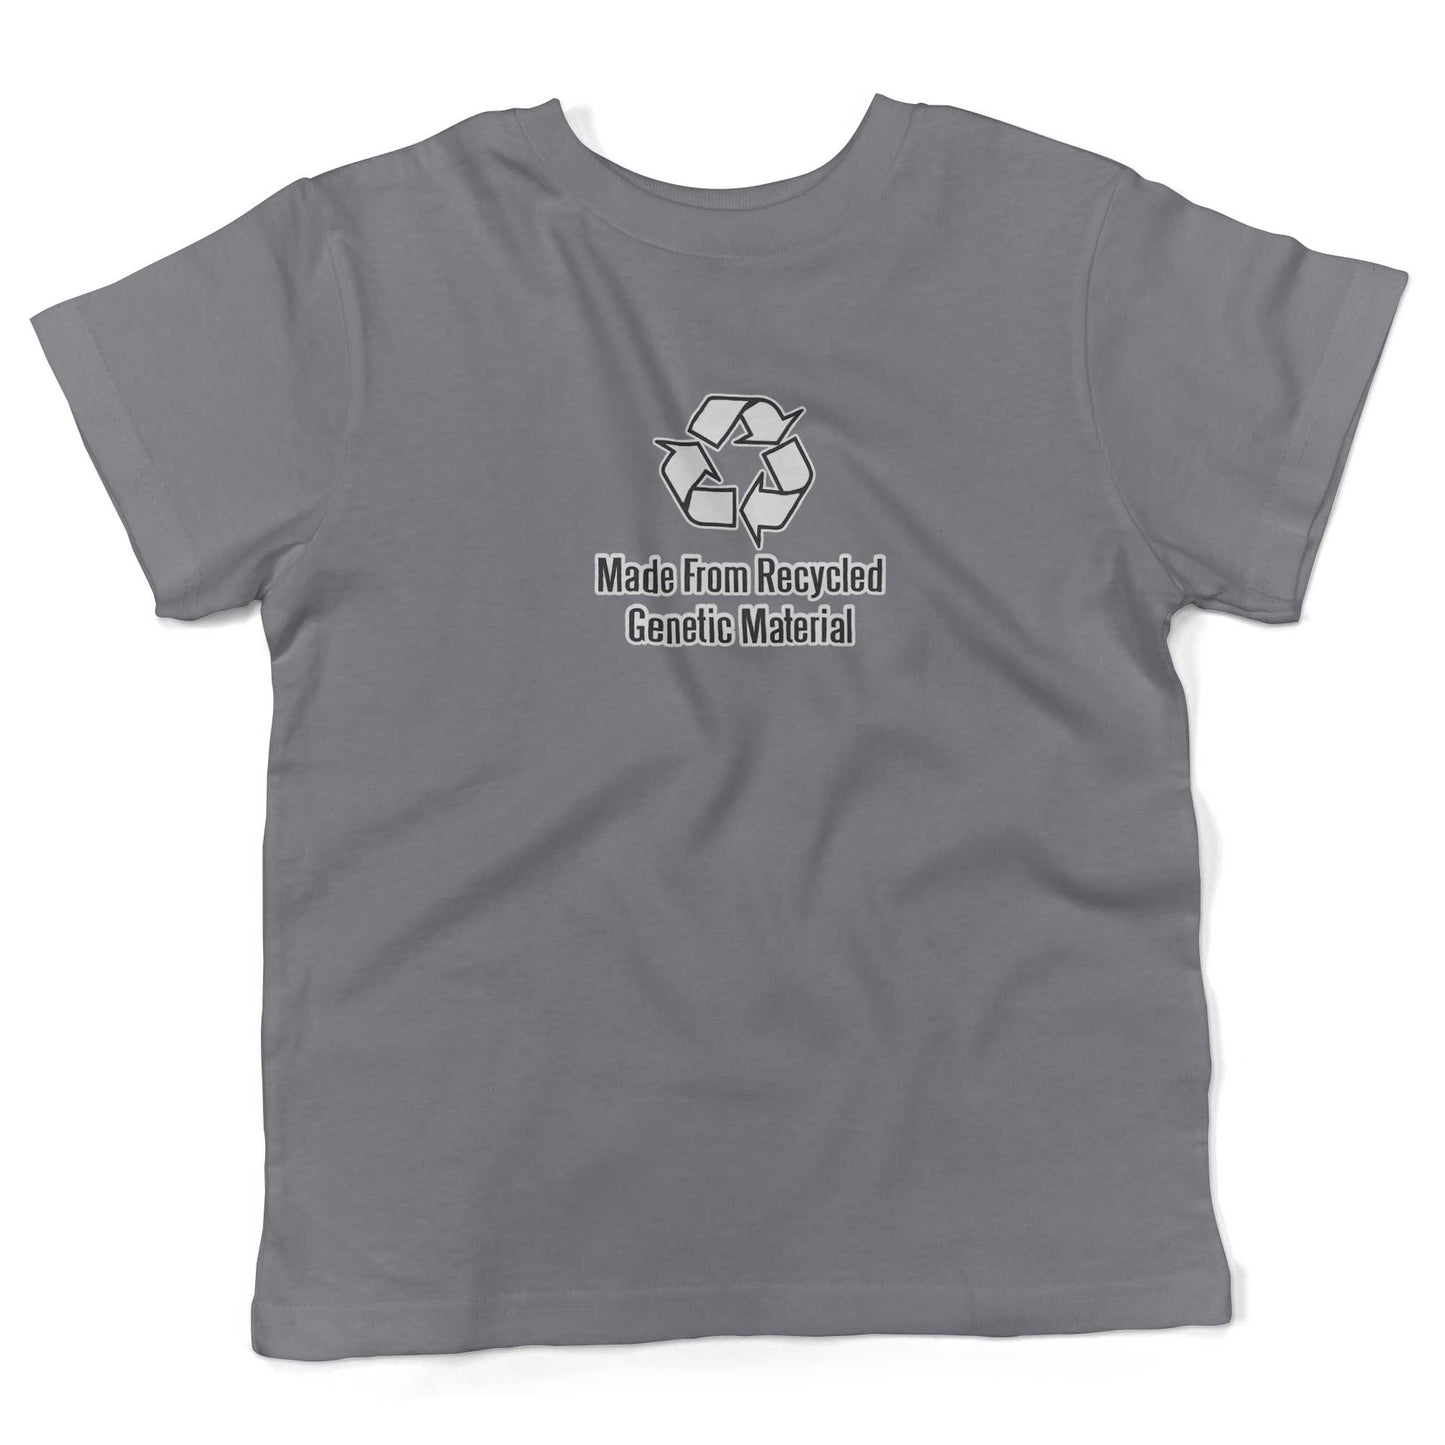 Made From Recycled Materials Toddler Shirt-Slate-2T